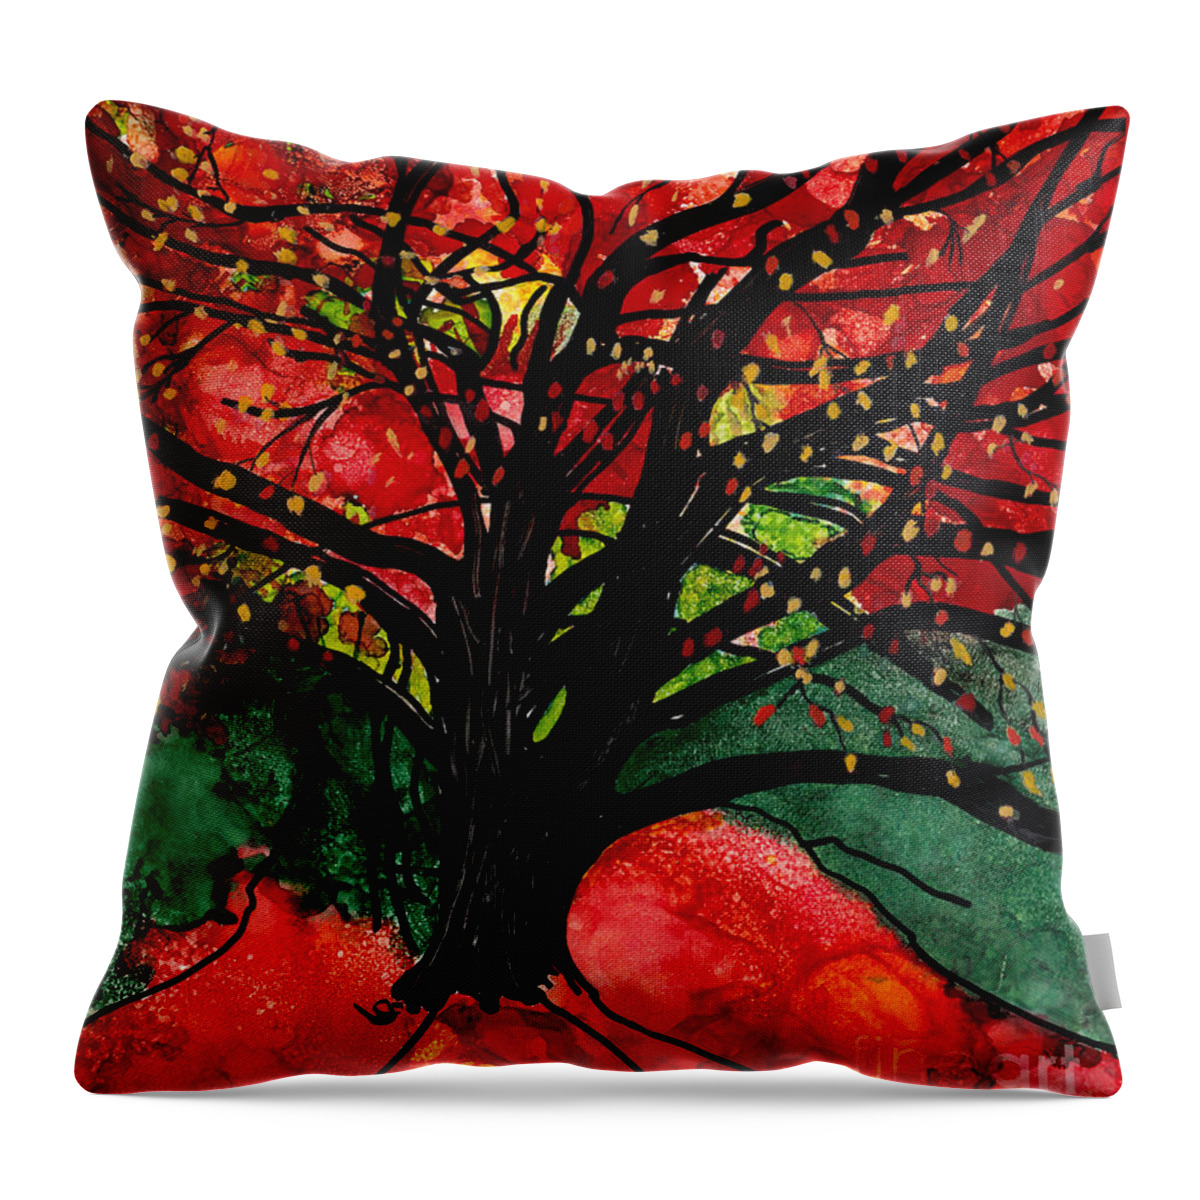 Blazing Autumn Tree Throw Pillow featuring the mixed media Blazing Red Orange Autumn Tree by Conni Schaftenaar